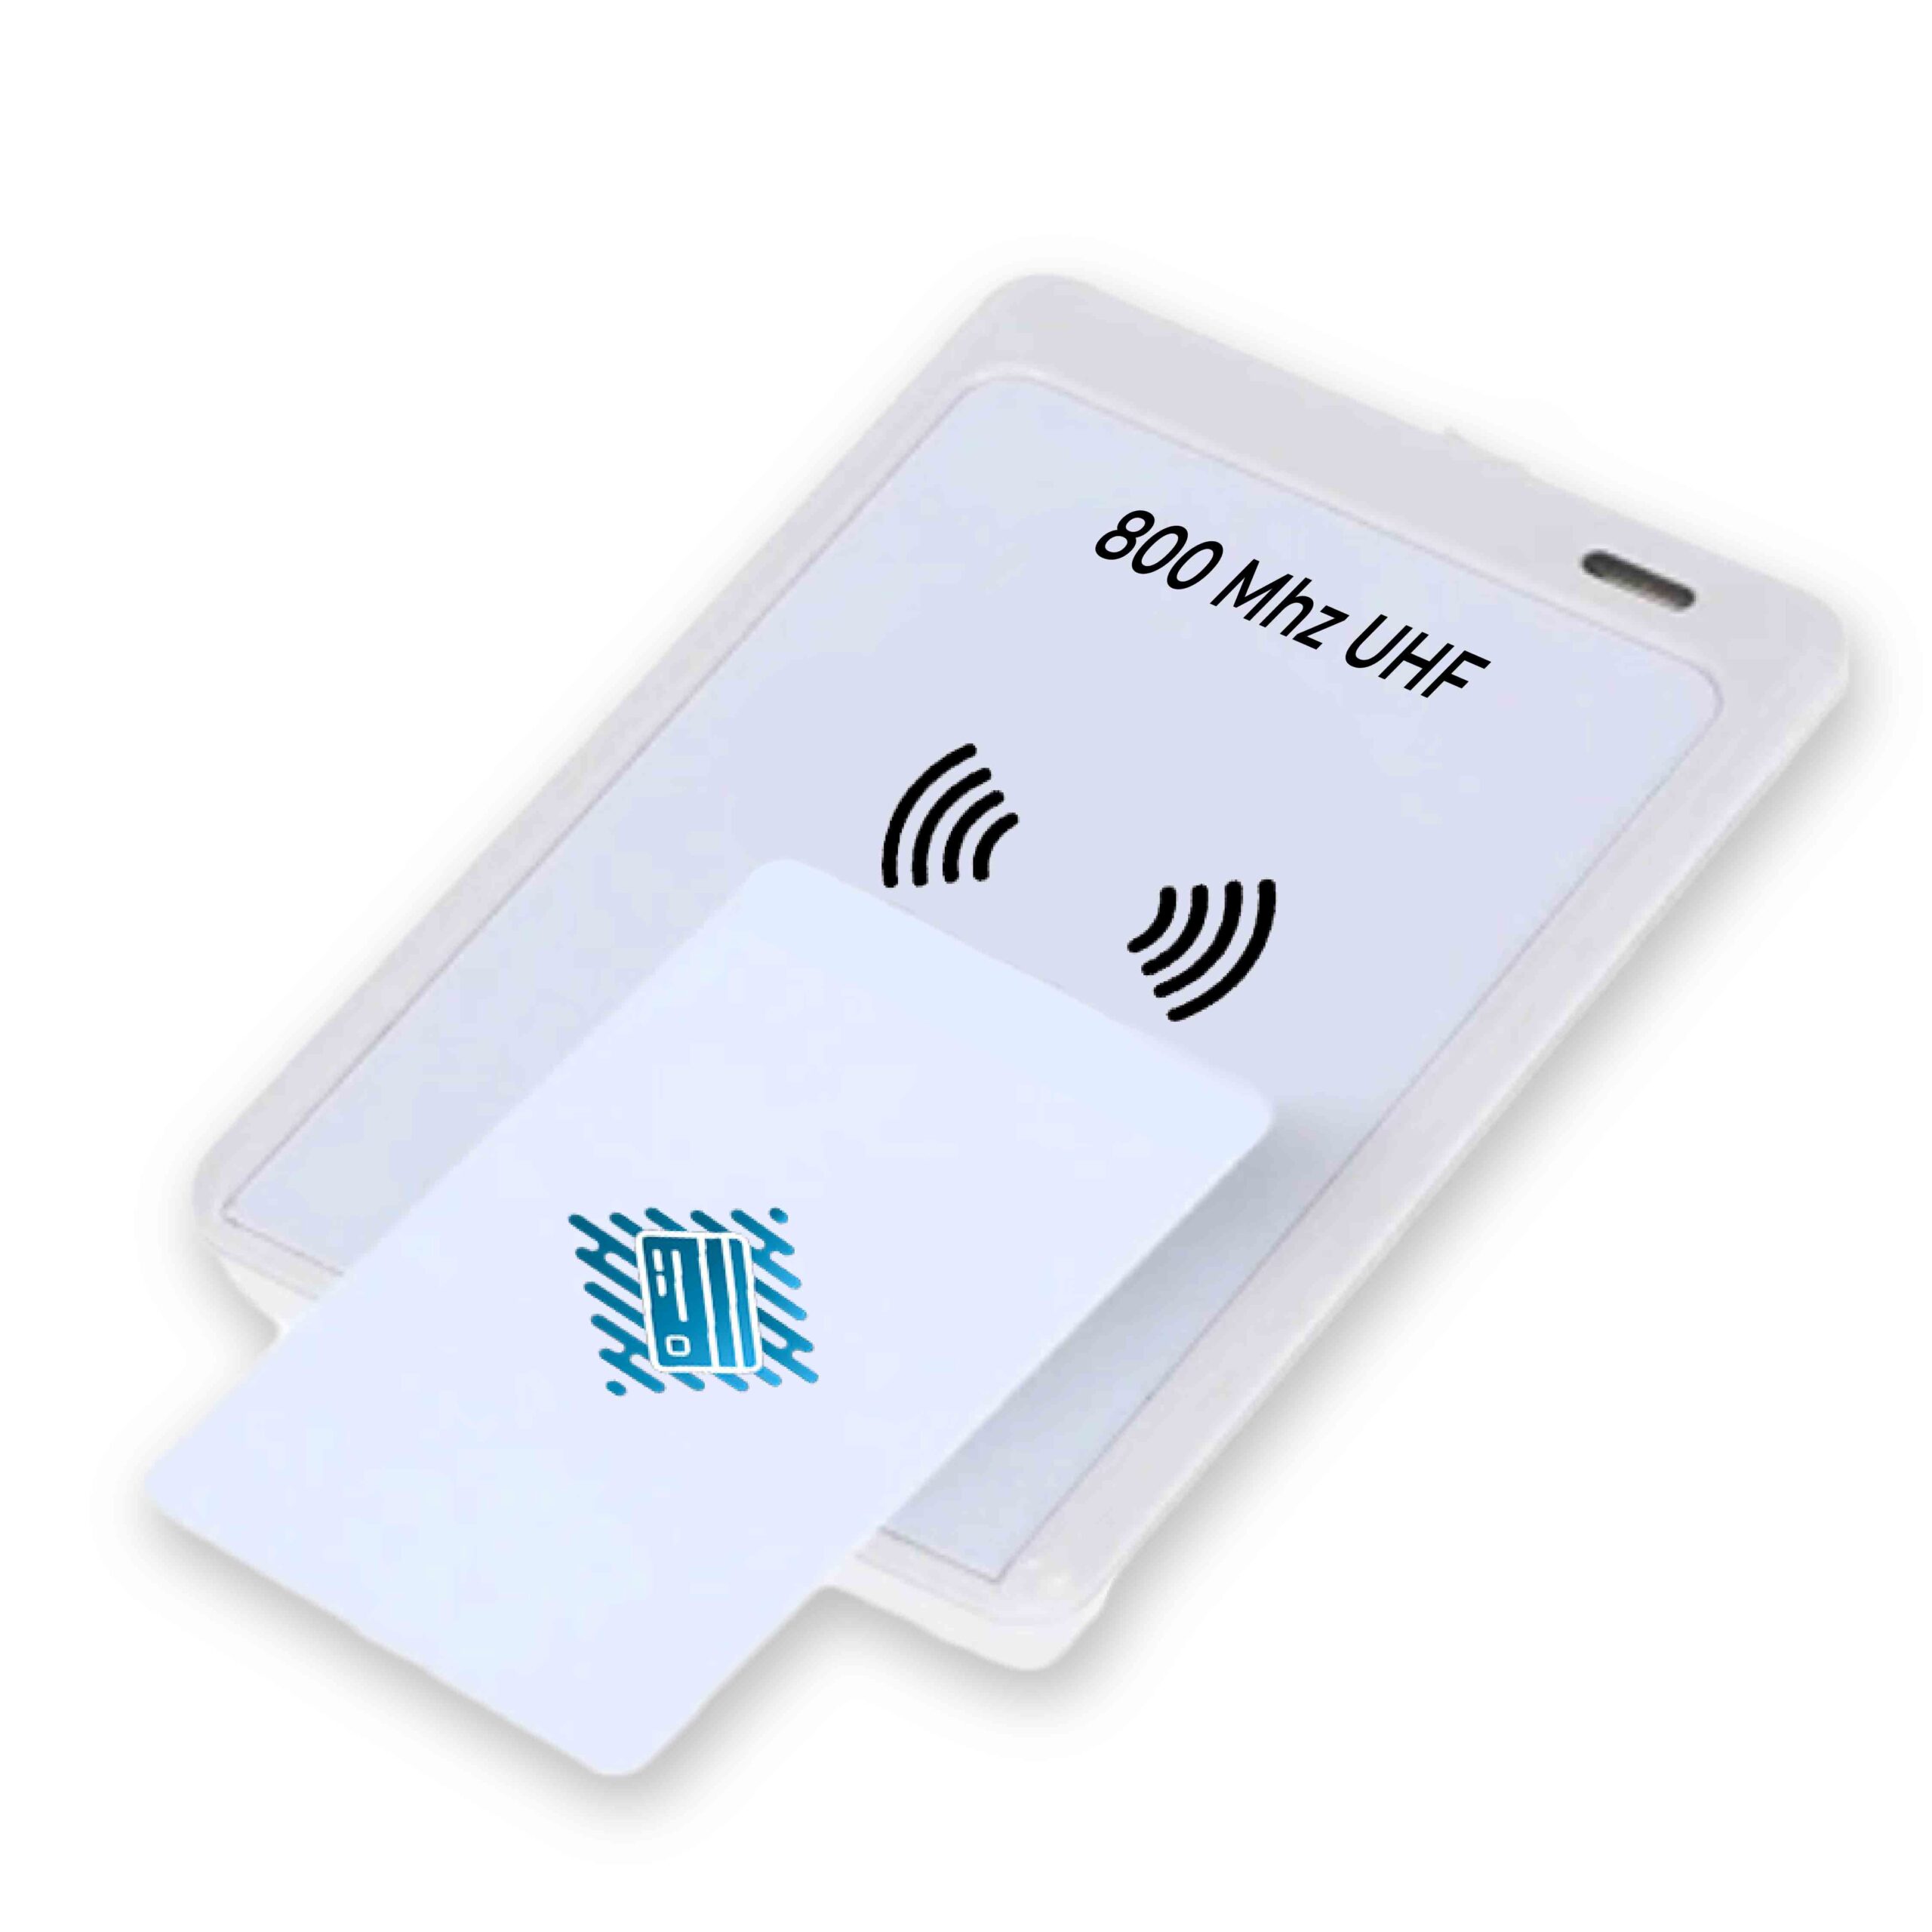 Lettore rfid 800 - Cardnology